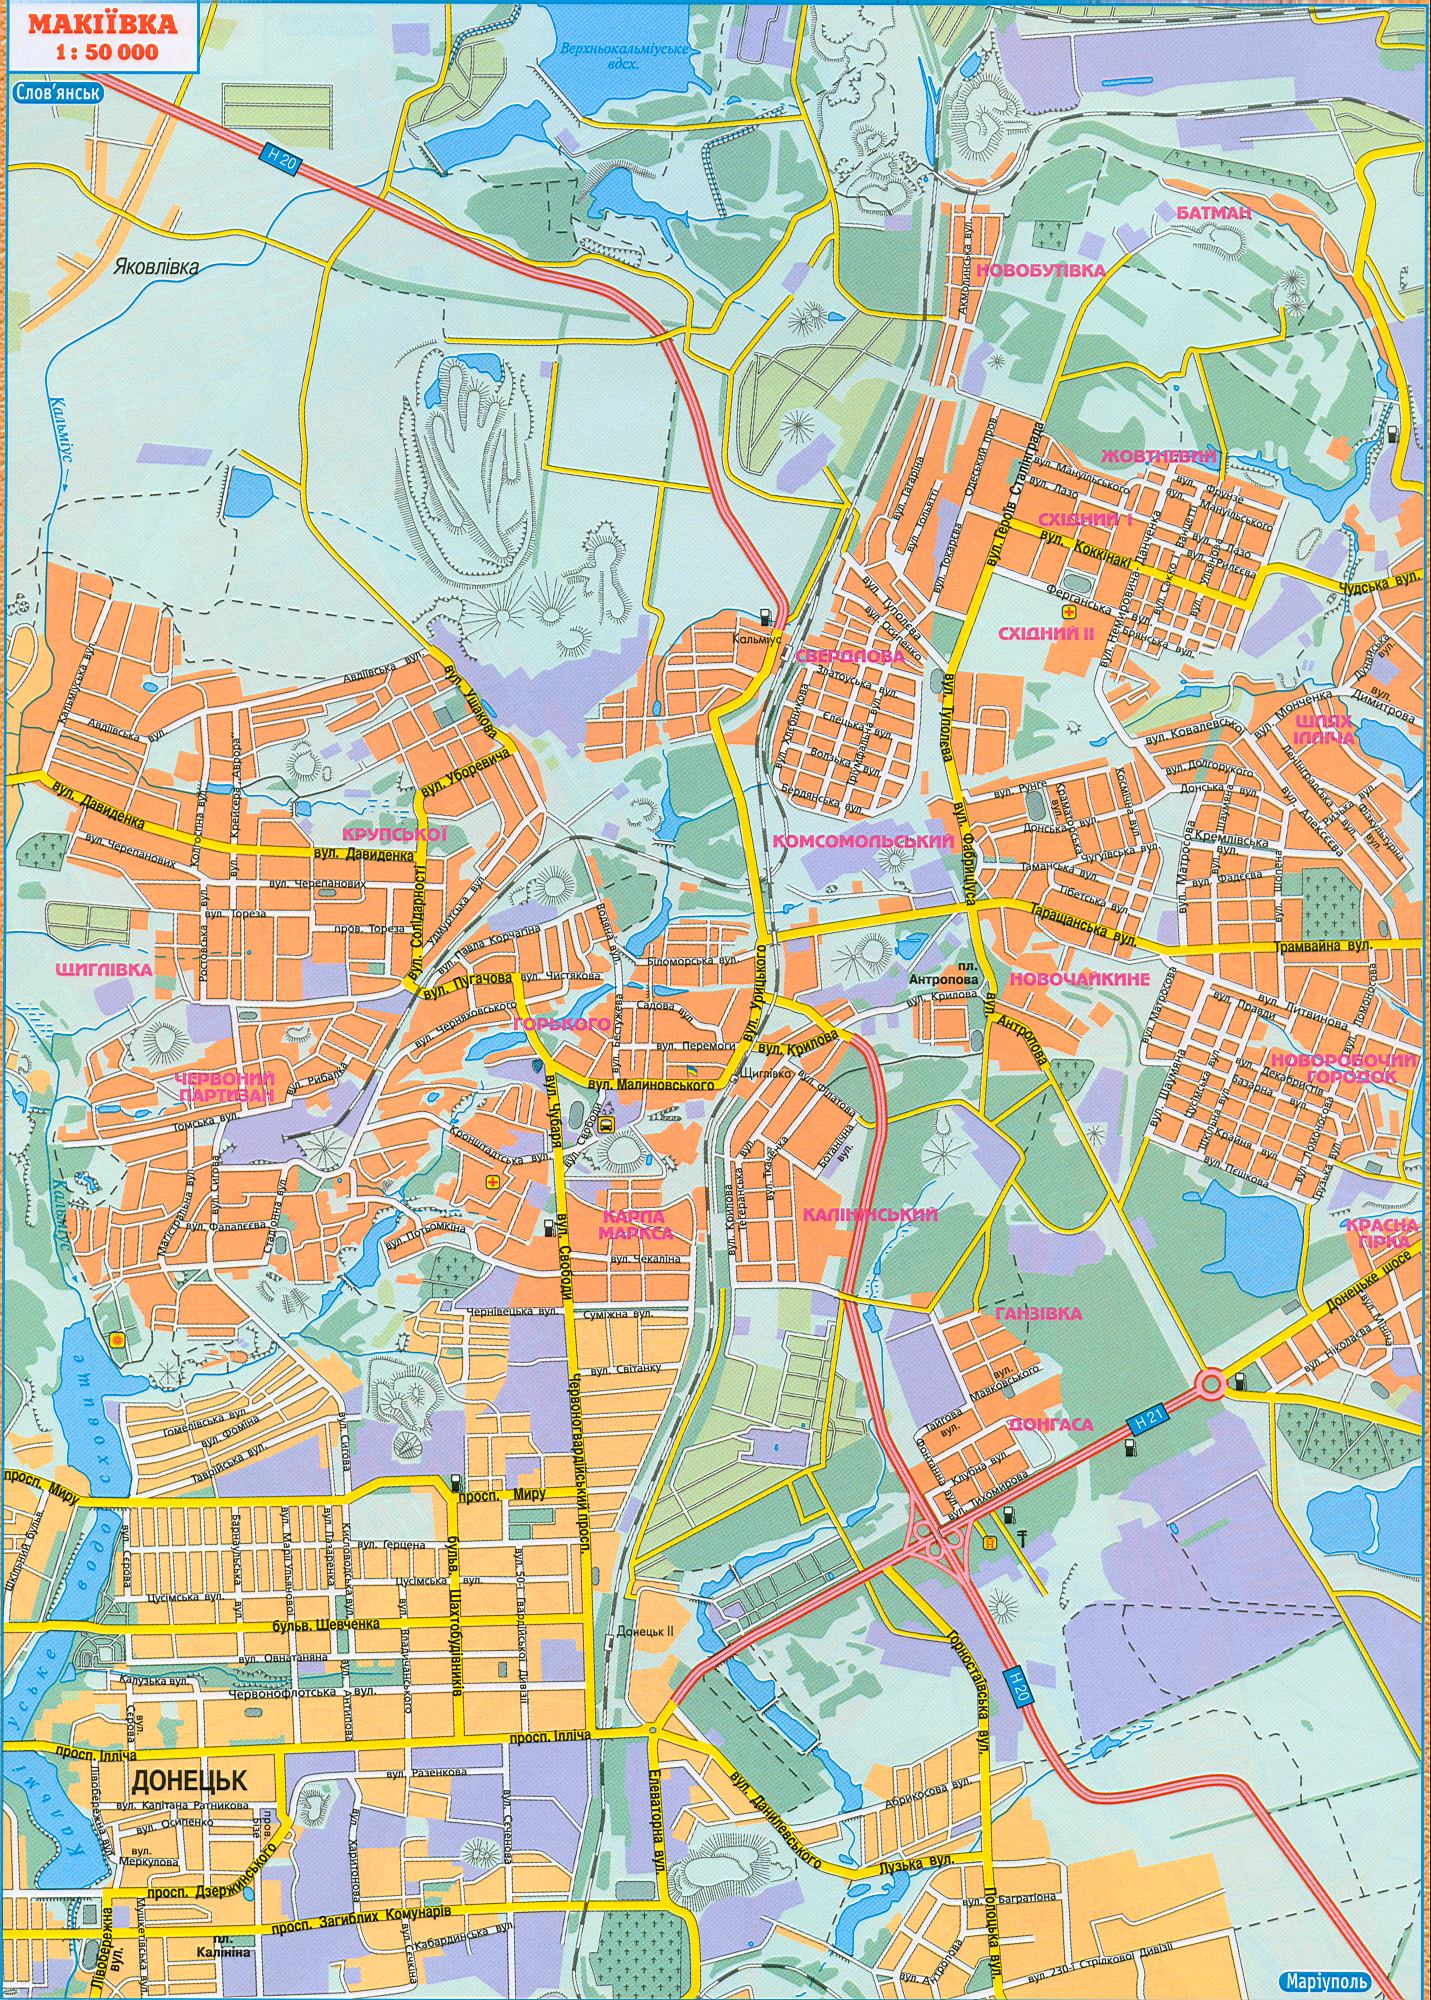 Map of Makeevka updated in 2008 includes part of Donetsk, scale 1cm: 500m. Download for free